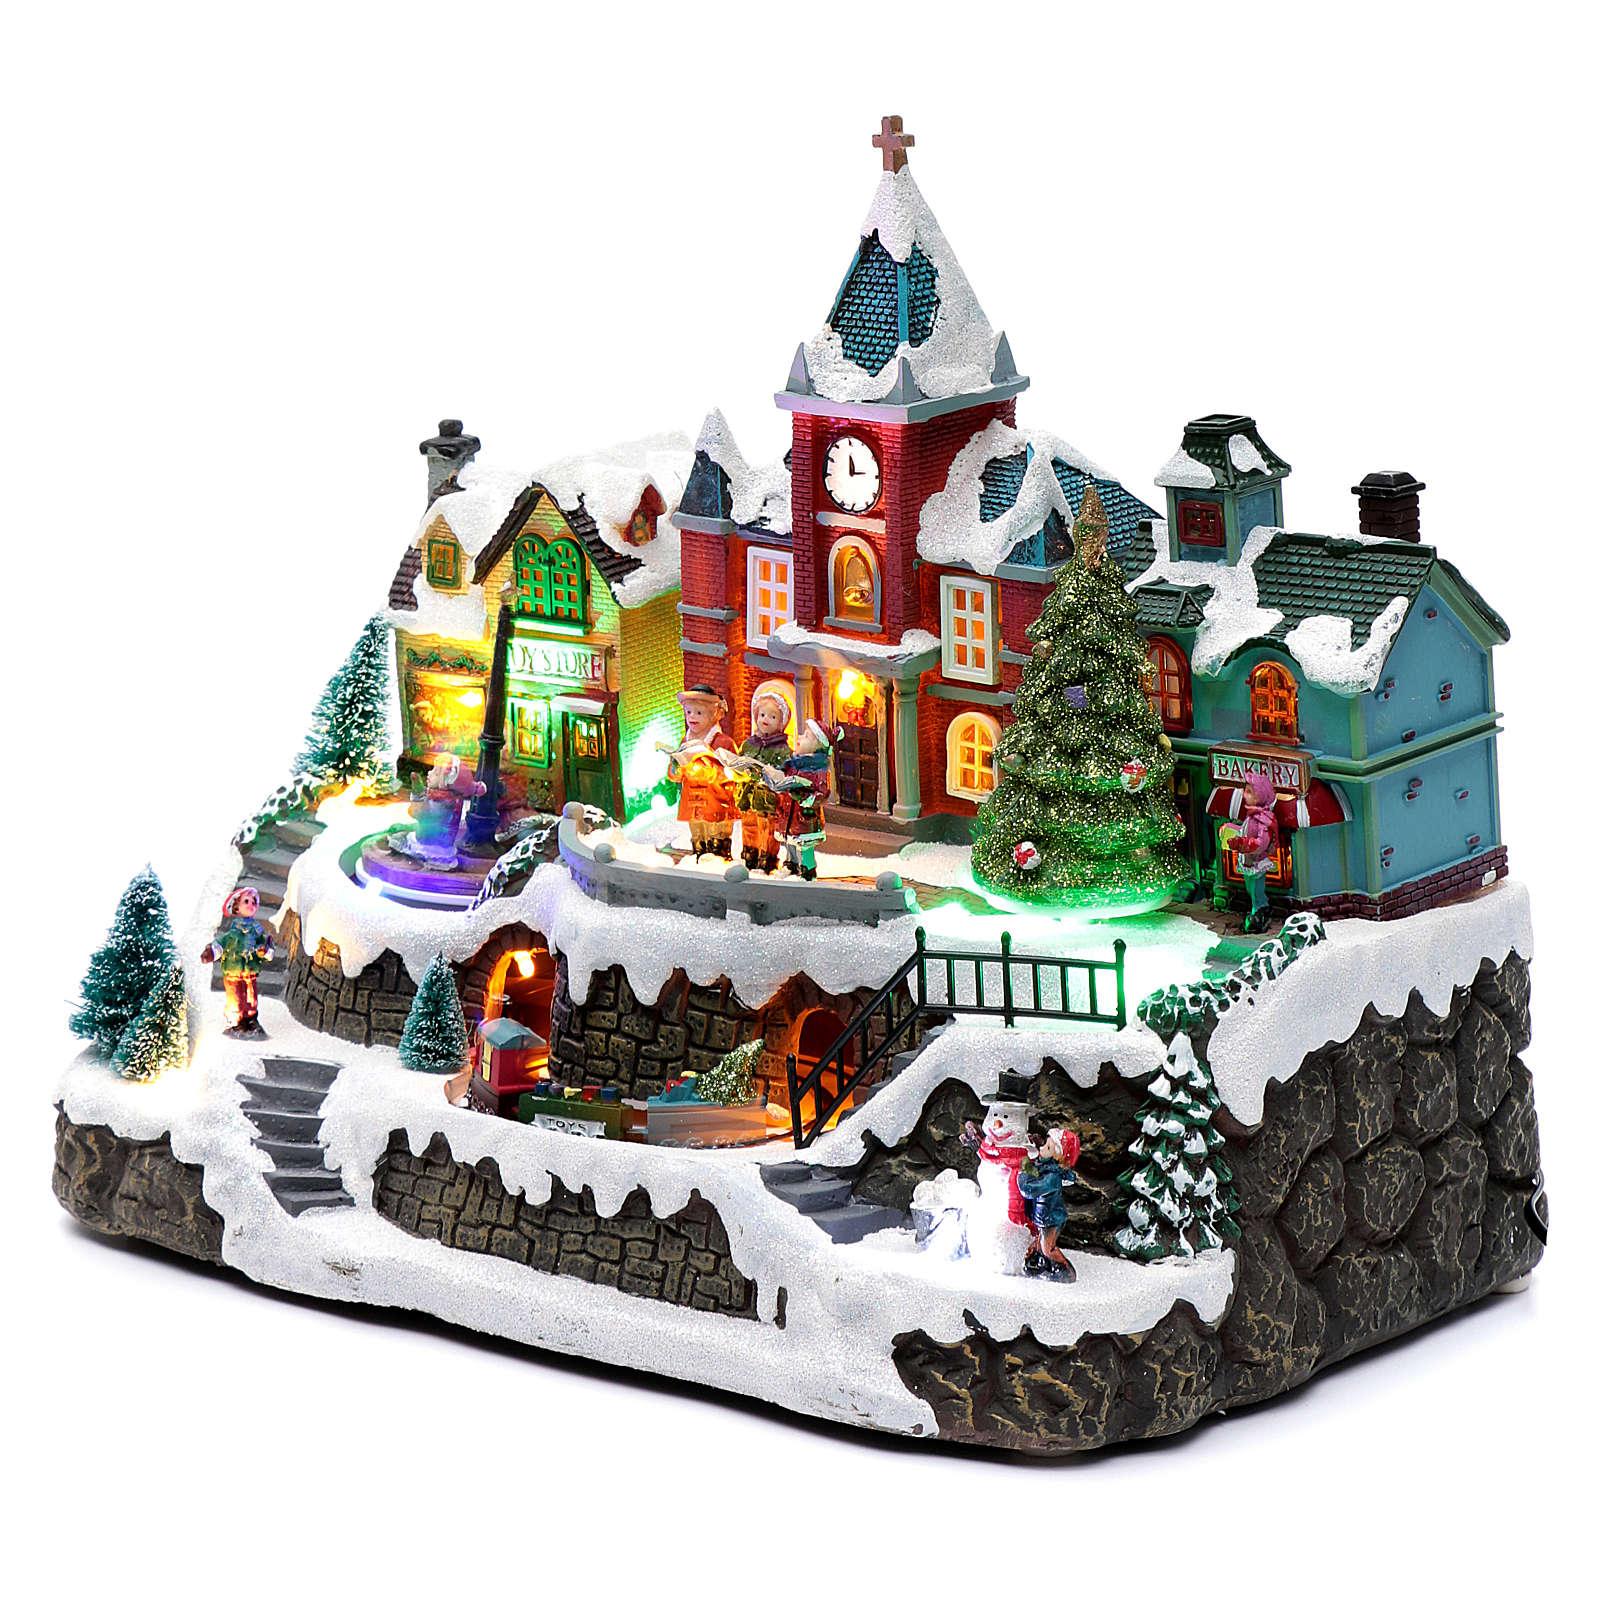 LIghted Christmas village with rotating train, fountain and | online sales on HOLYART.com